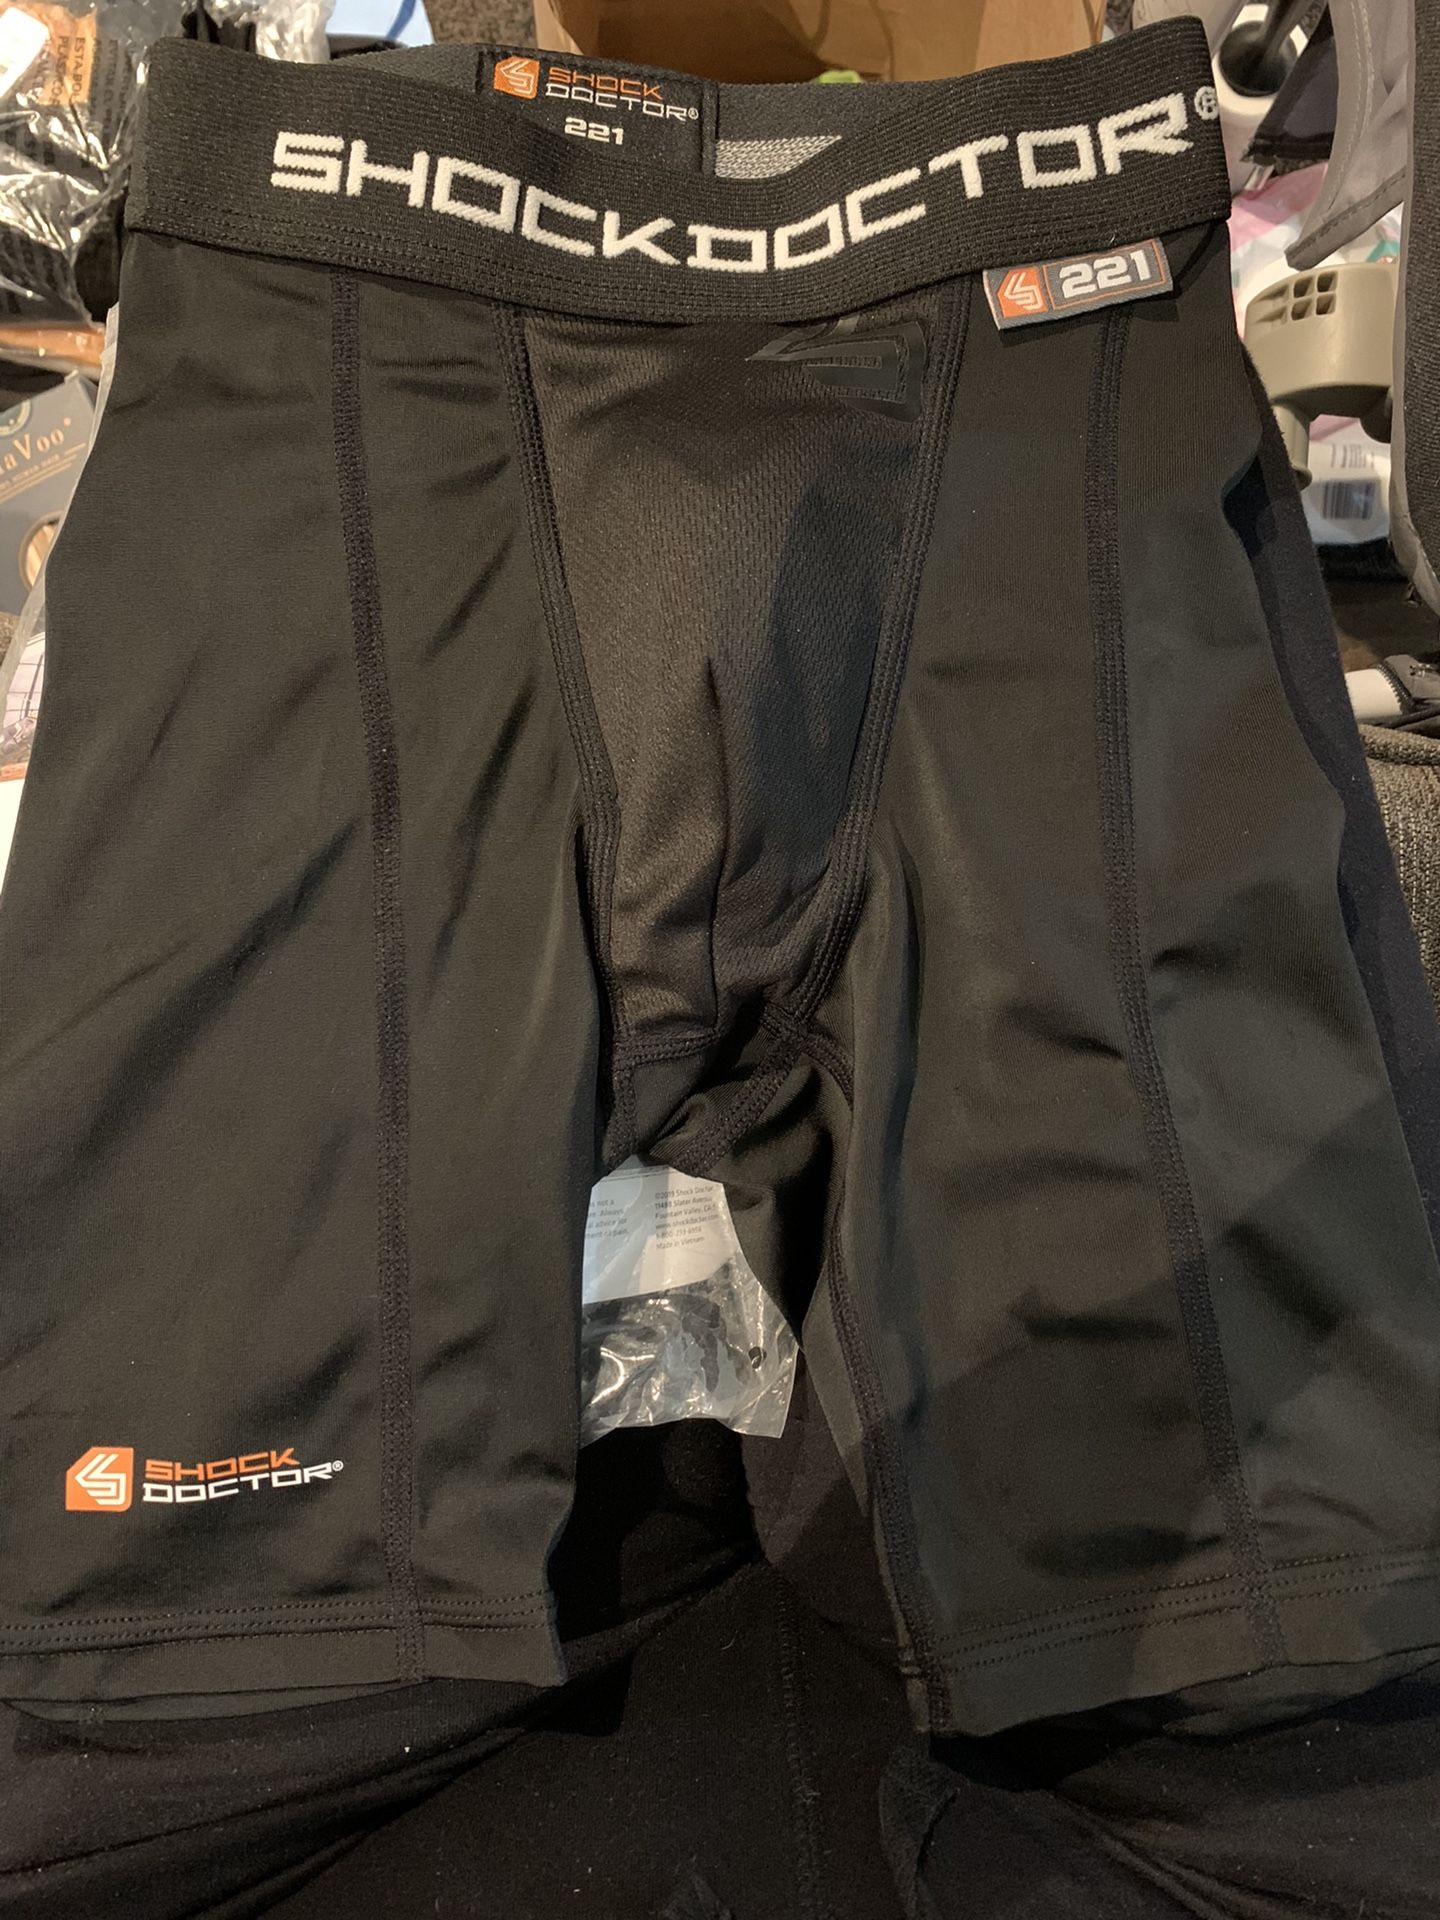 New - Shock Doctor Compression Shorts With Cup